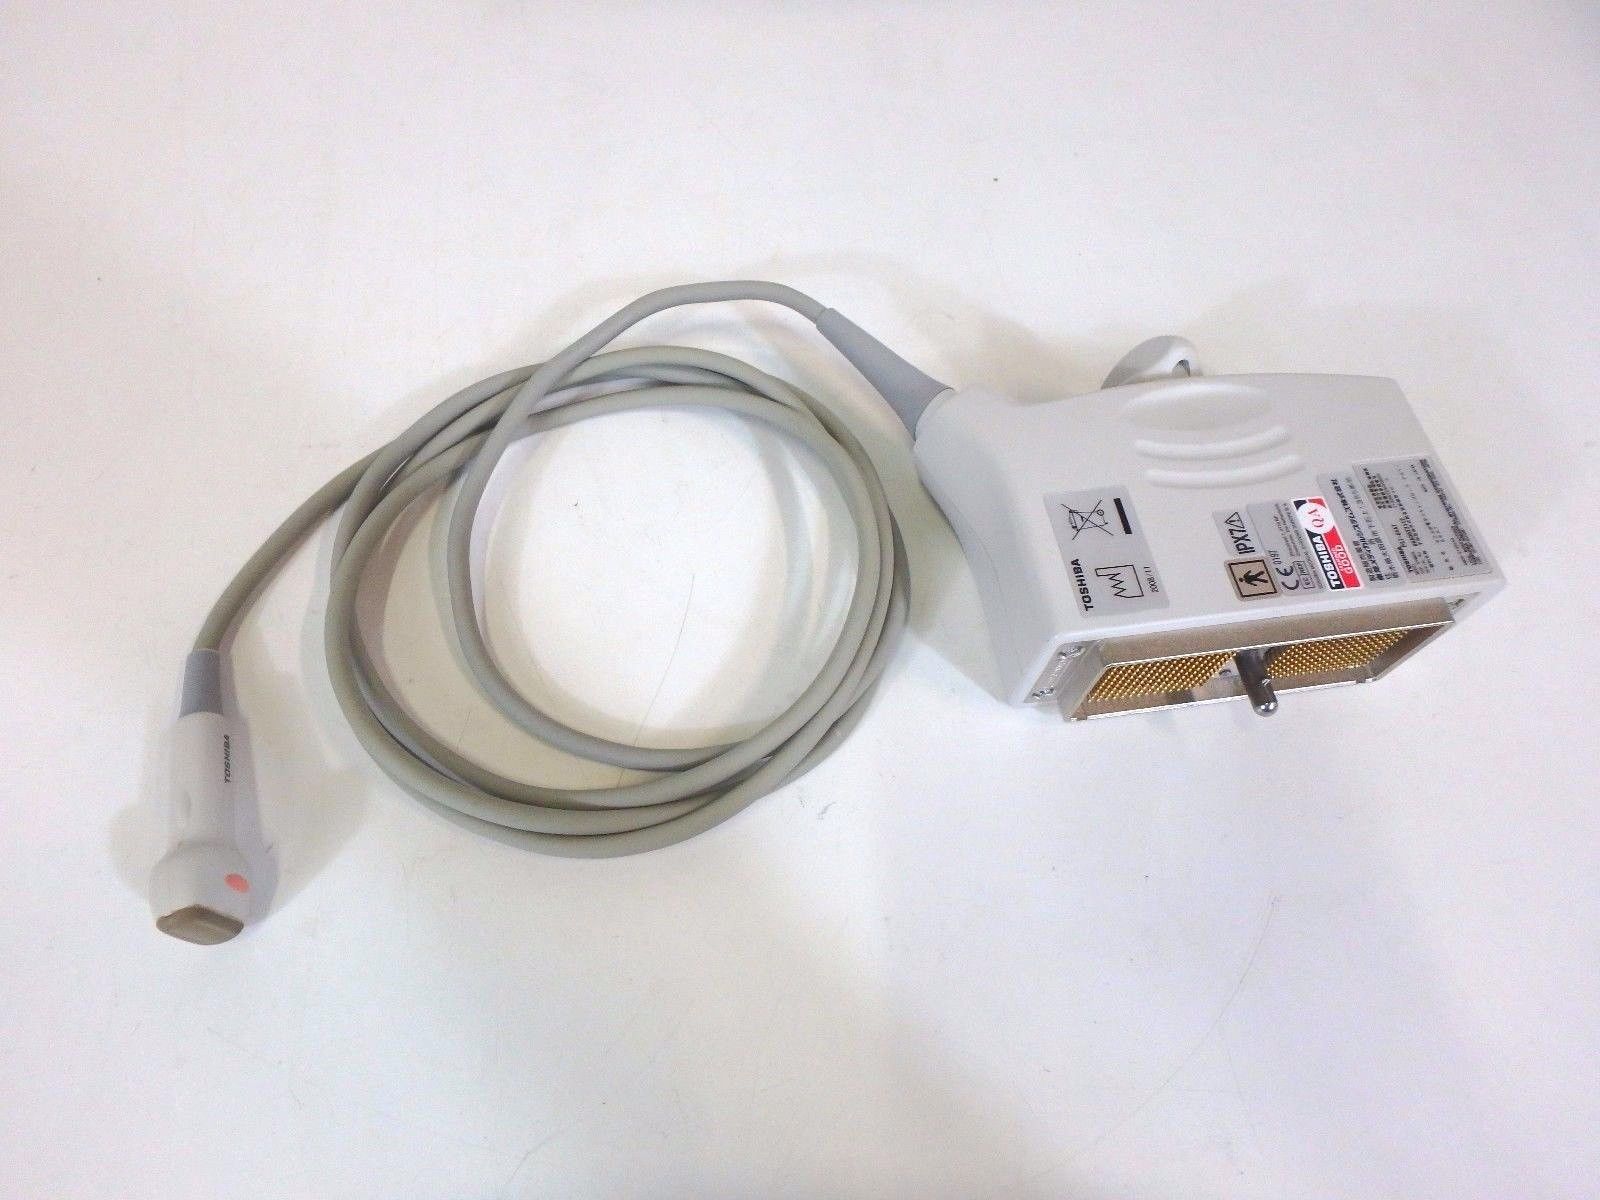 Toshiba PST-65AT Phased Sector Array 6.5MHz Ultrasound Transducer Probe DIAGNOSTIC ULTRASOUND MACHINES FOR SALE